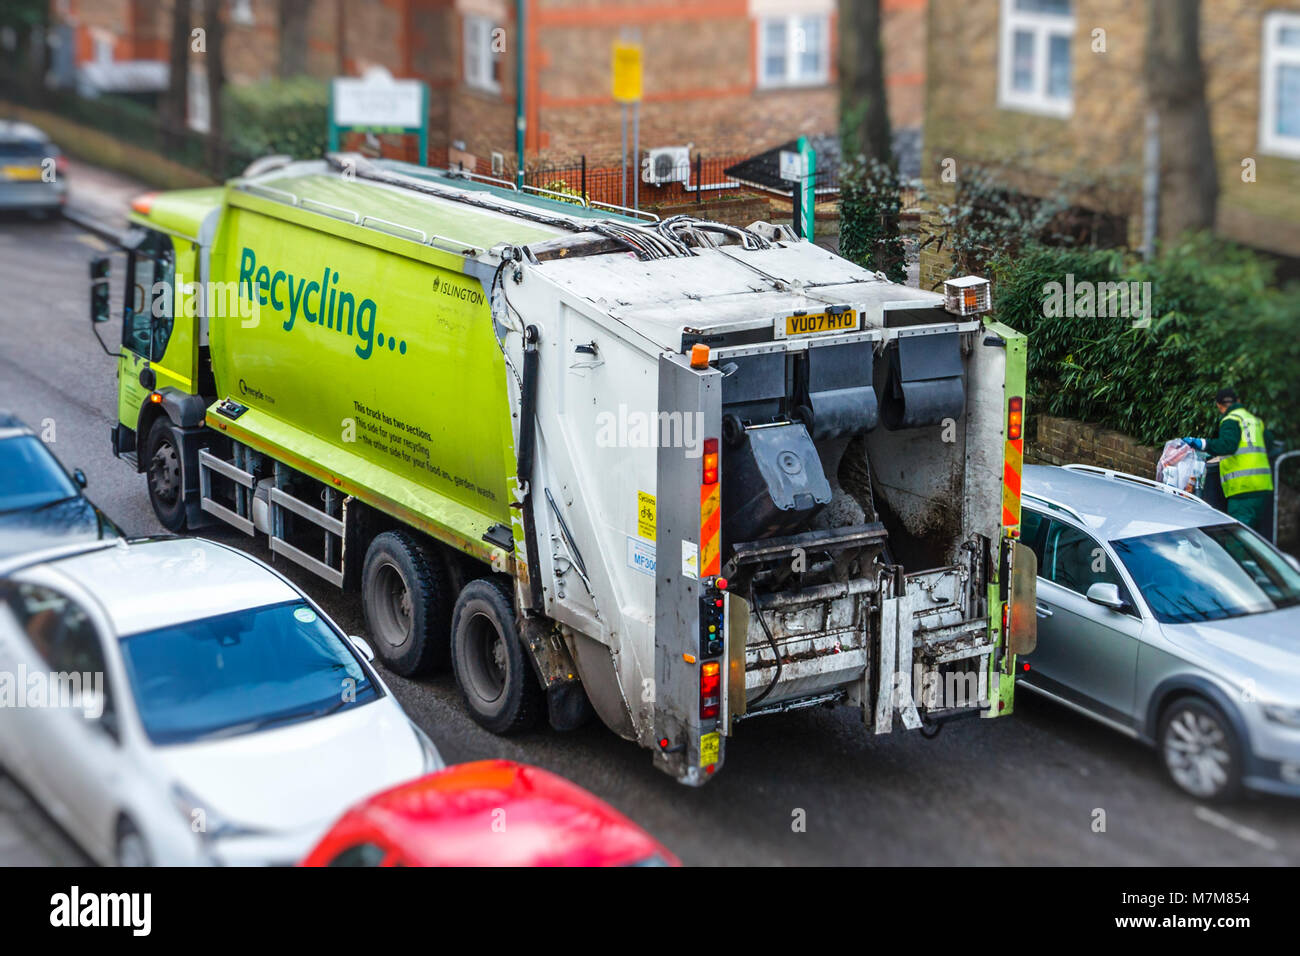 Recycling lorry making its weekly collection in a residential street in Islington, London, UK Stock Photo